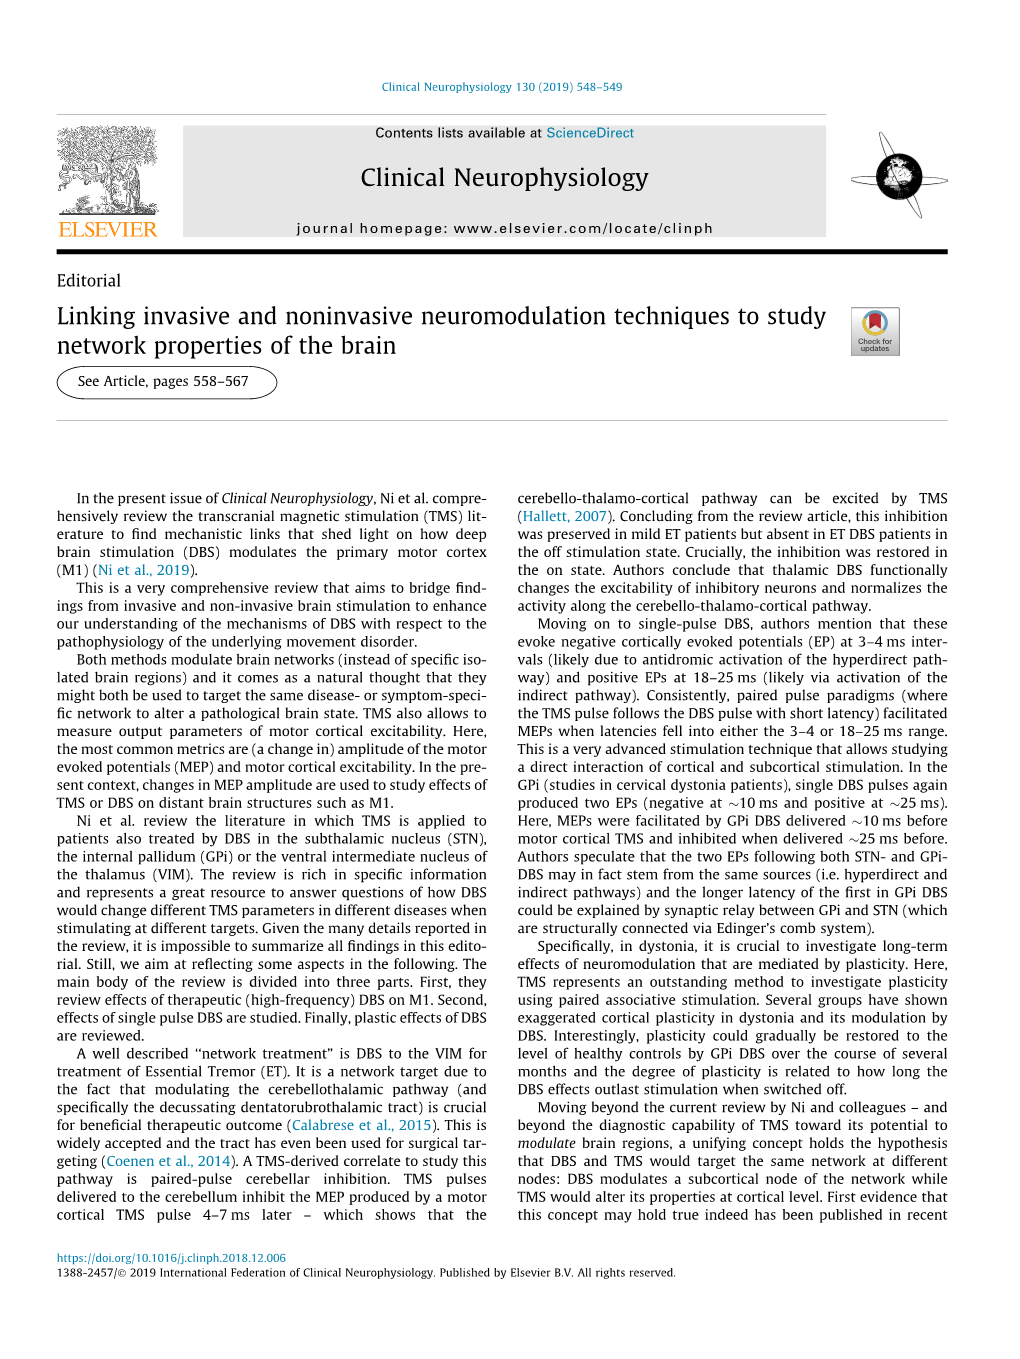 Linking Invasive and Noninvasive Neuromodulation Techniques to Study Network Properties of the Brain